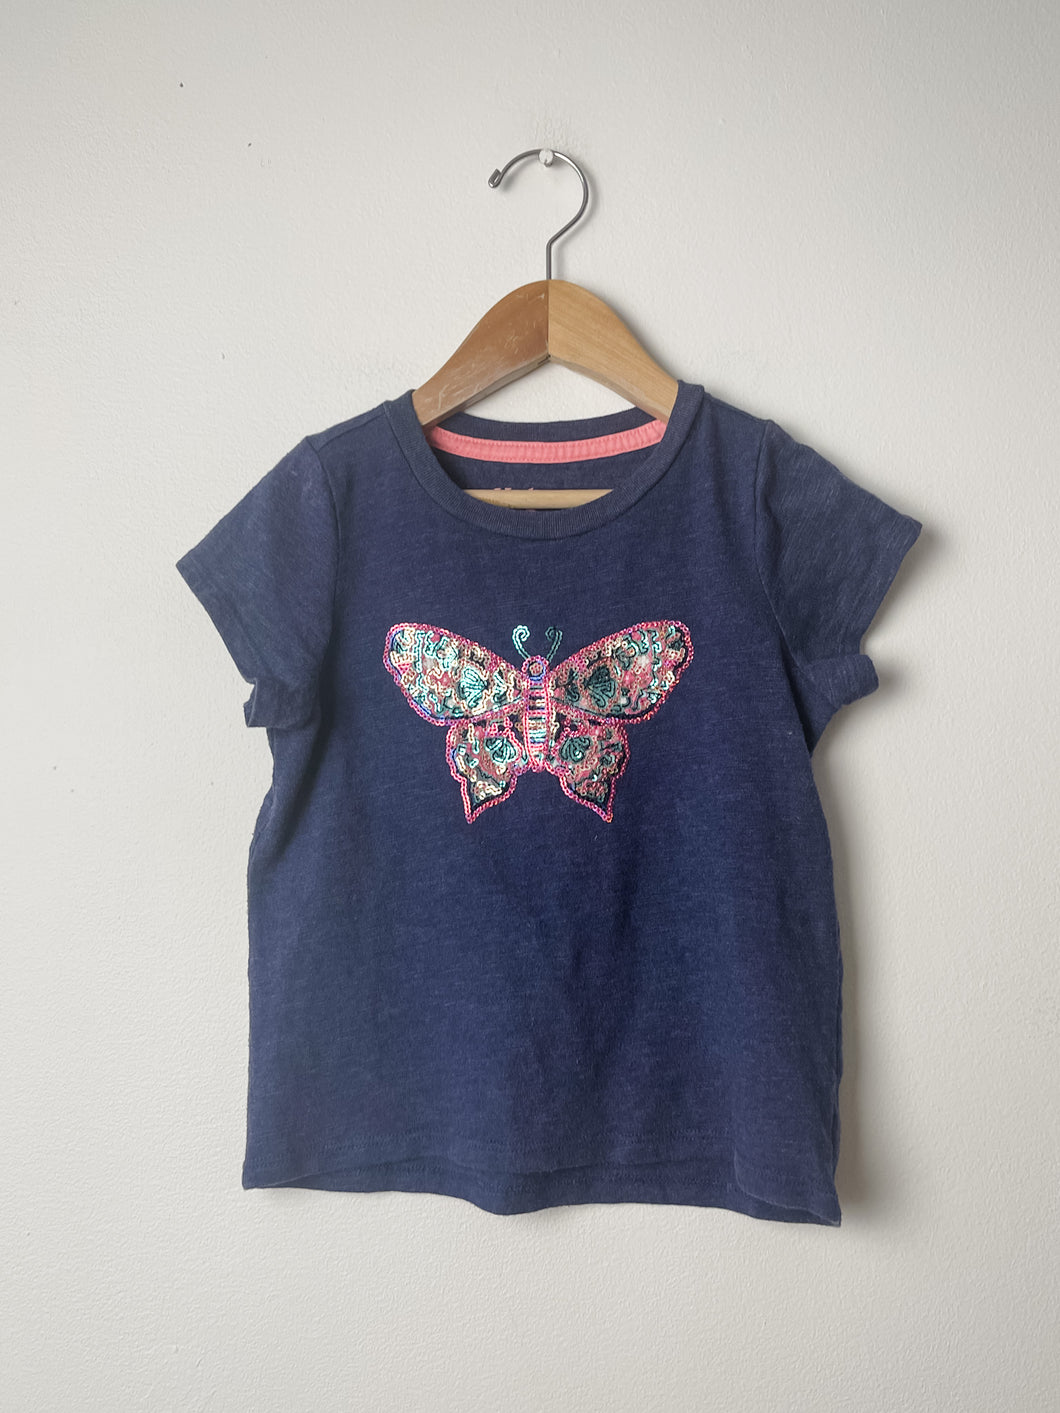 Butterfly Hatley Shirt Size 6 Years